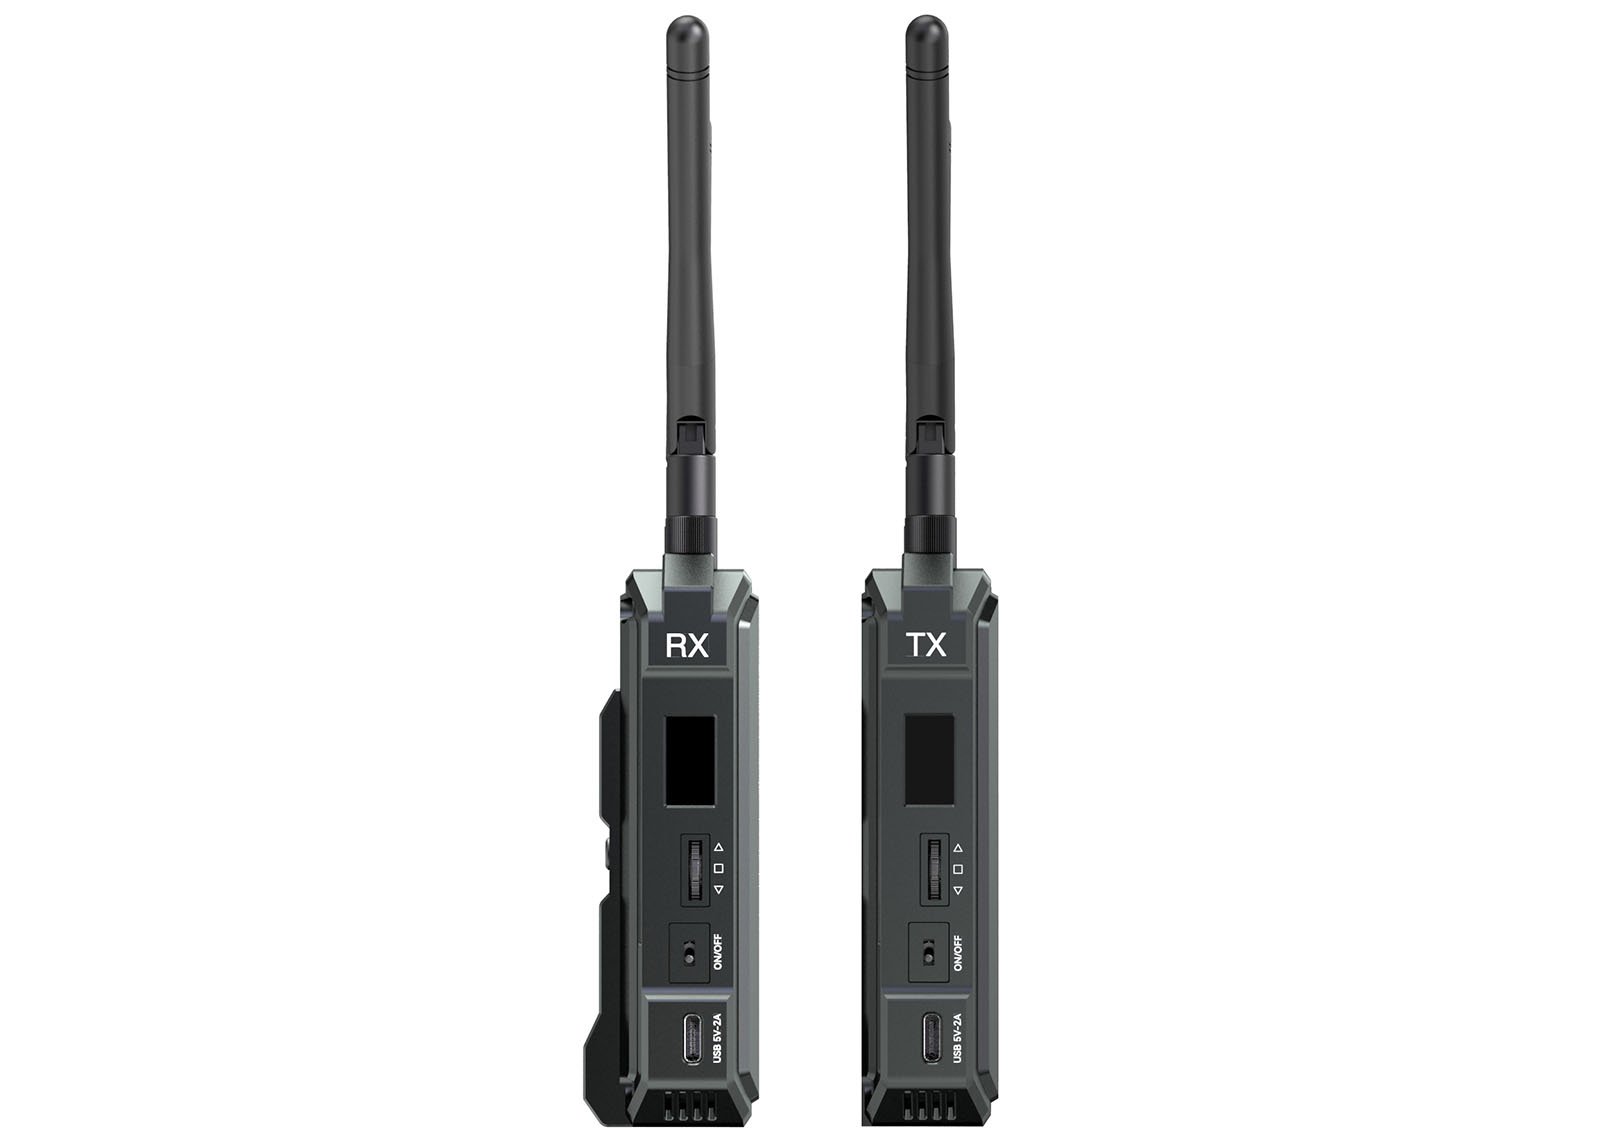 Two wireless audio transmitters, marked rx and tx, each with a tall antenna, display, and control buttons, set against a white background.